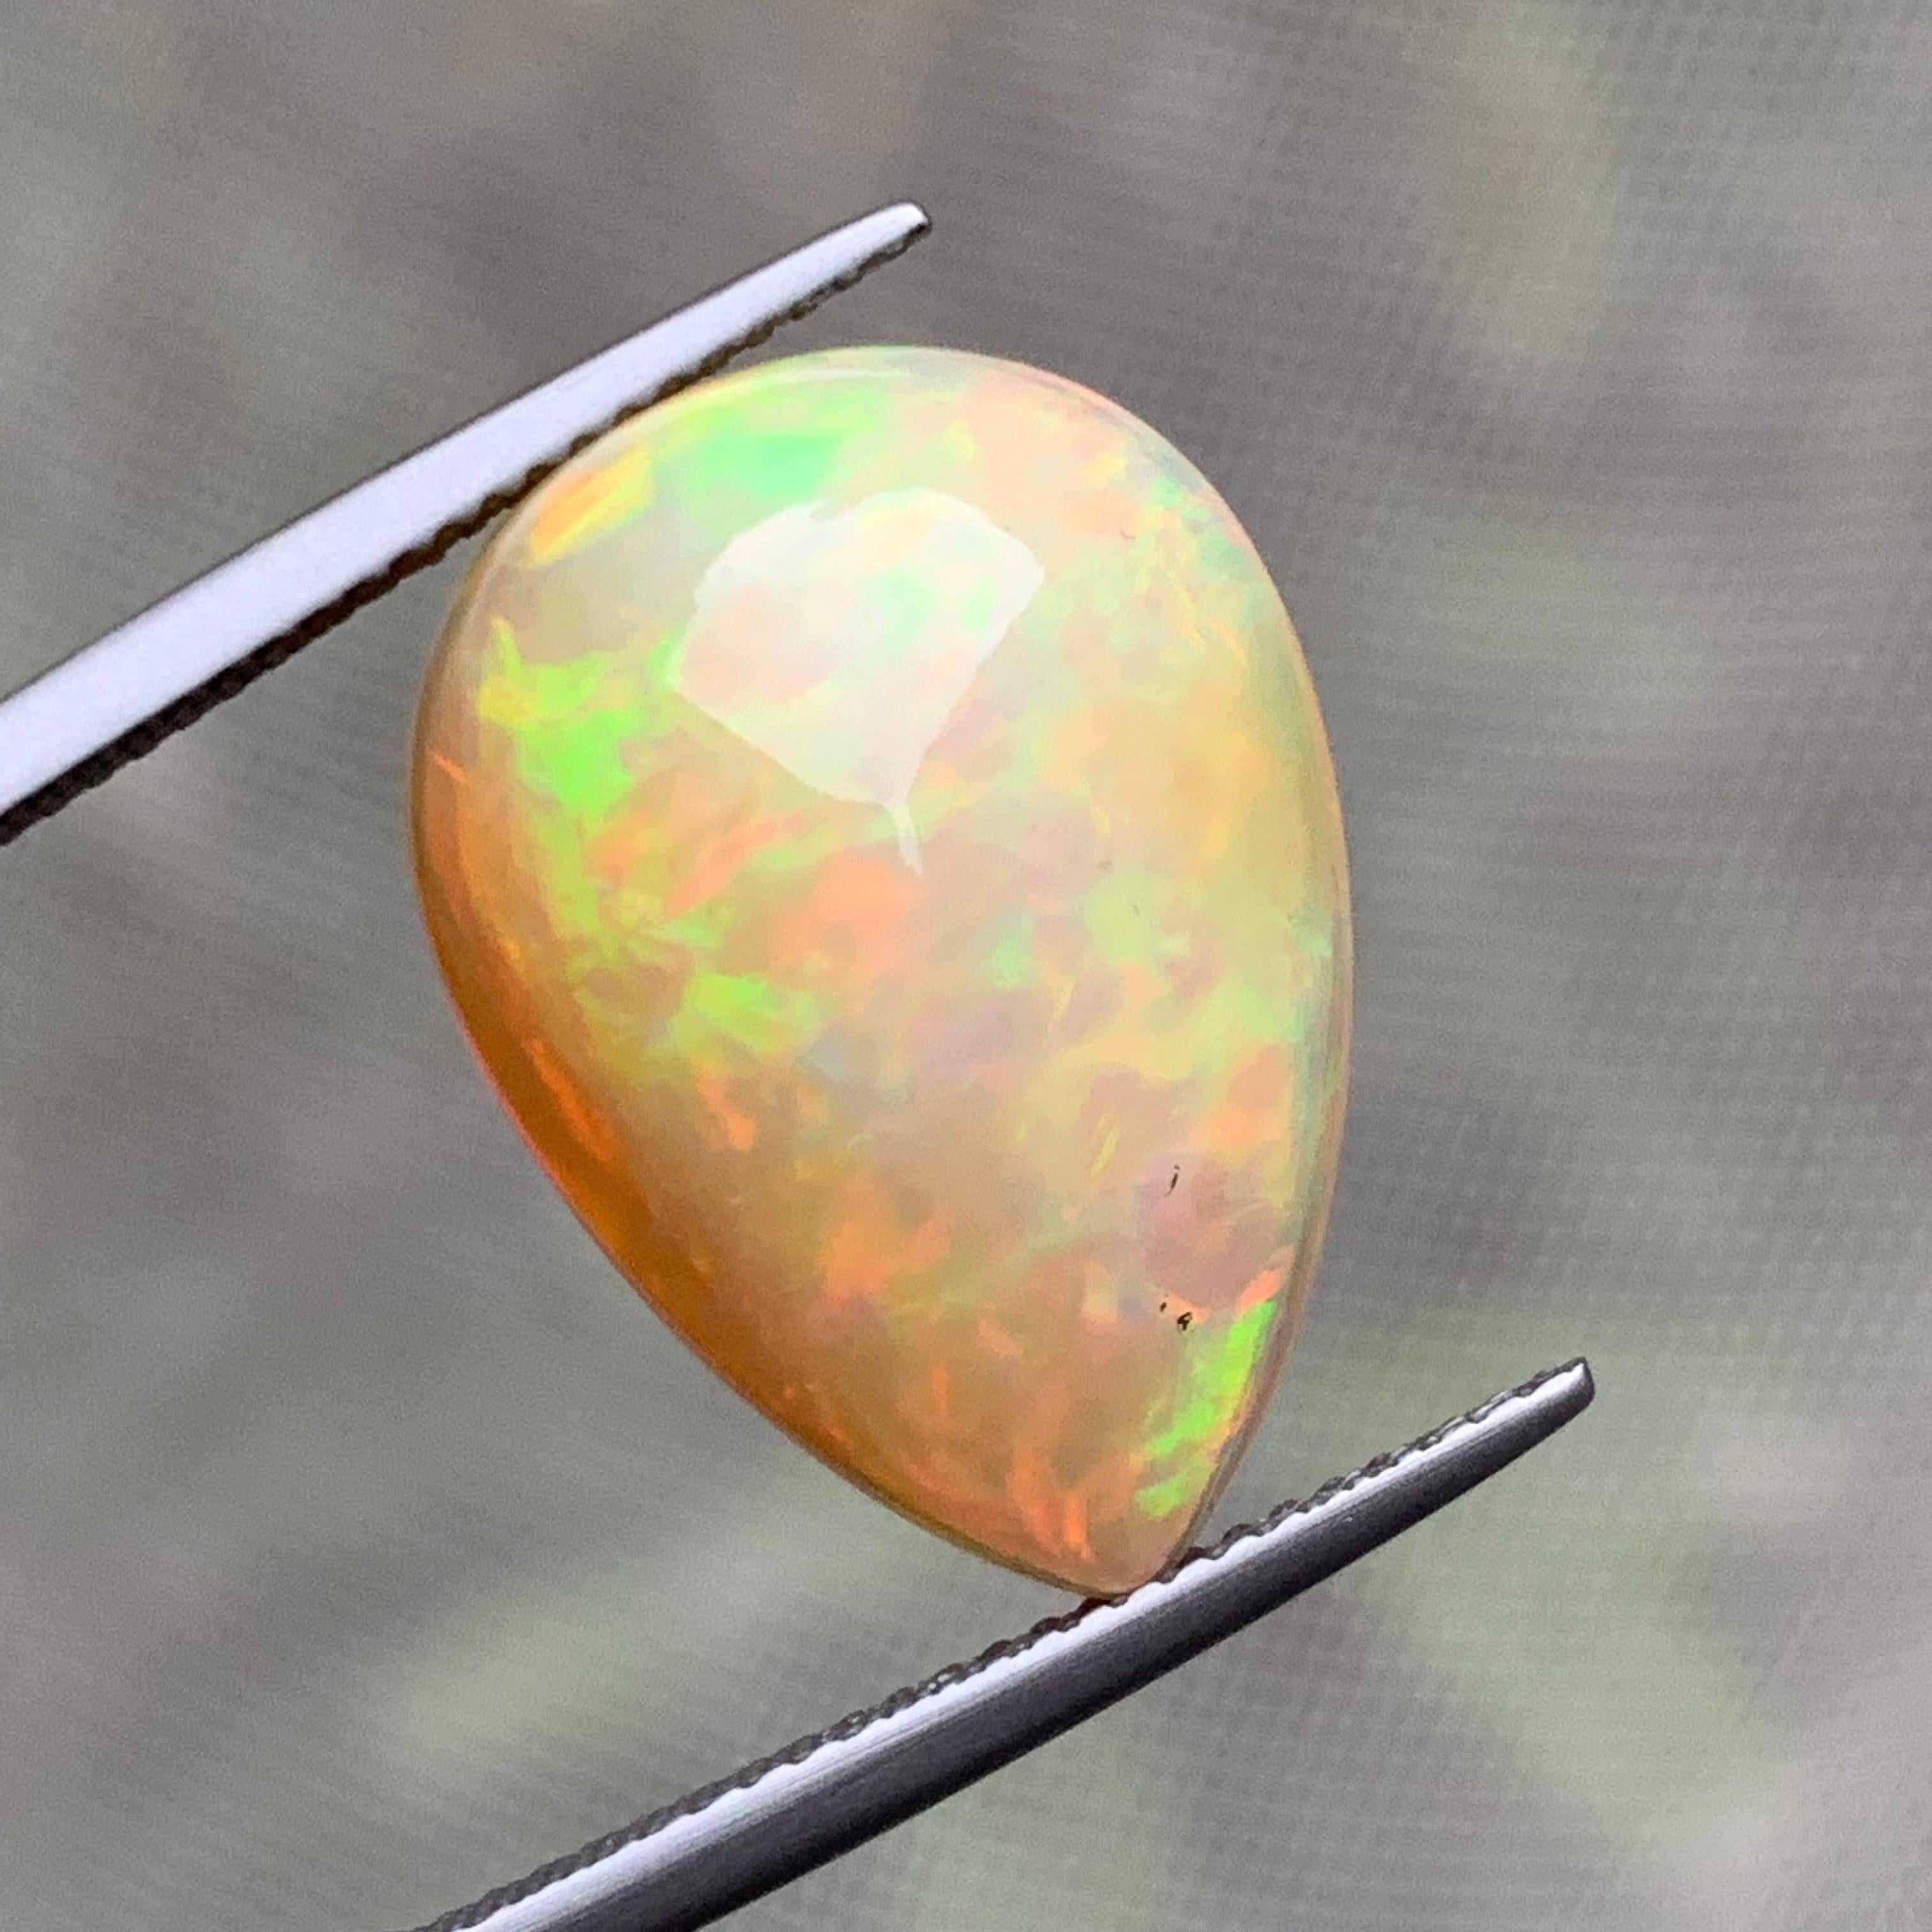 Opal with fire and play of color has always been considered one of the most desired gems in the marketplace, earning it the undisputed title as ‘Queen of Gemstones’. With the discovery of precious (and stable) opal in Ethiopia’s northern Welo